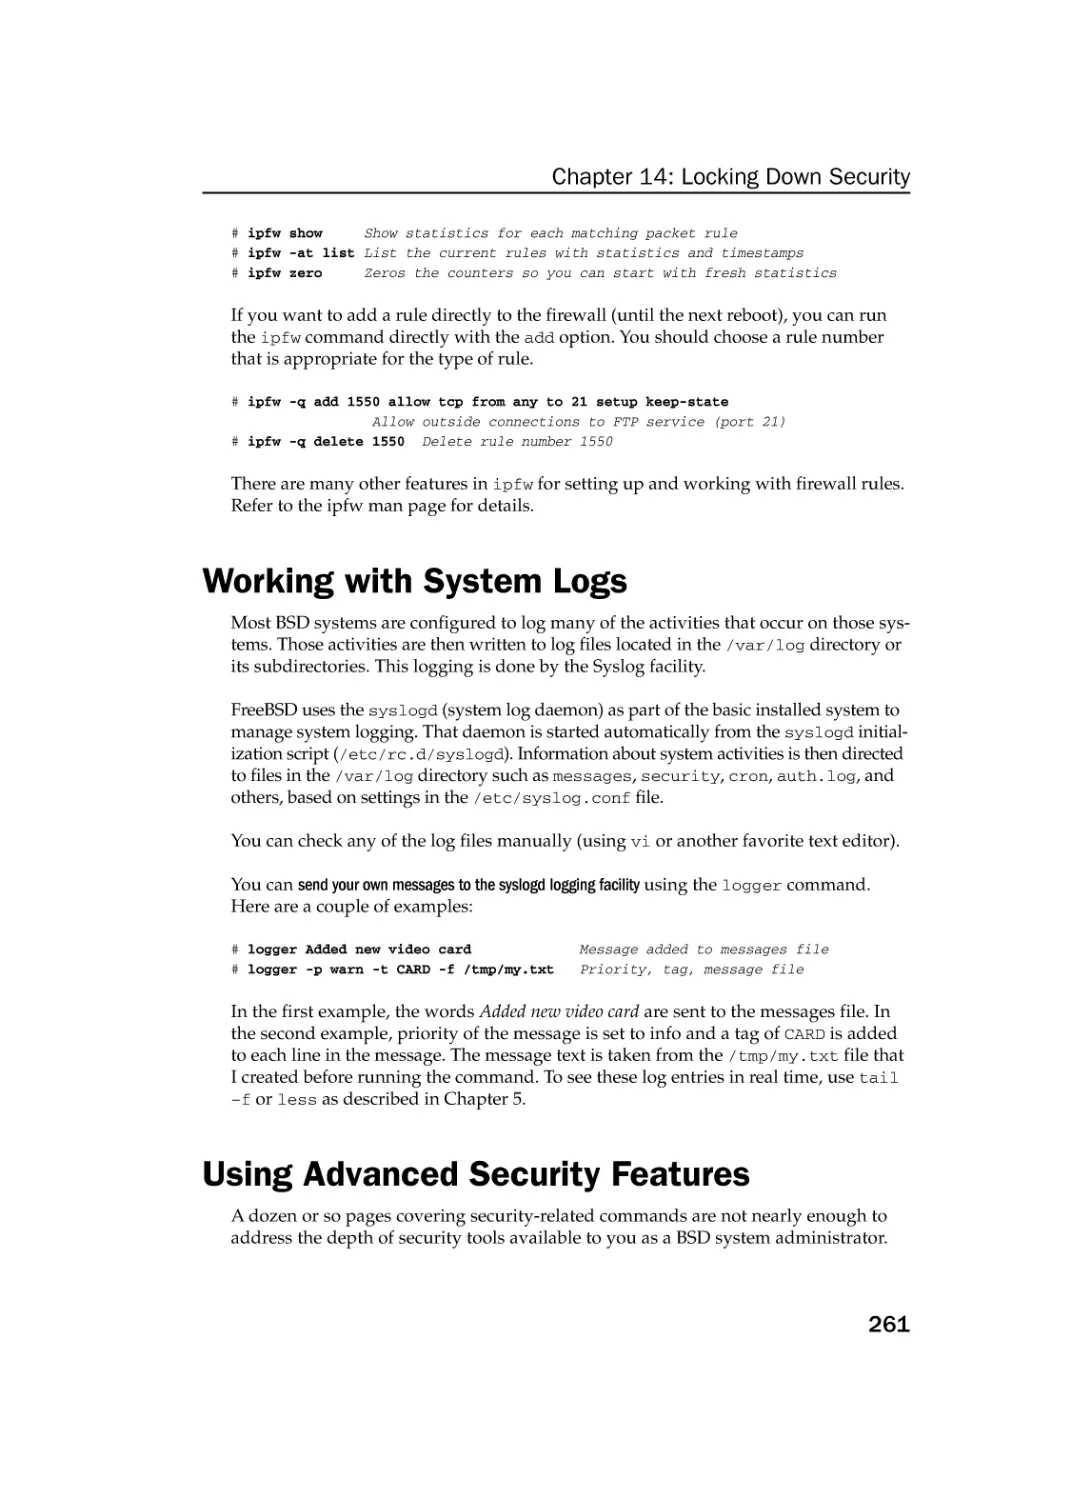 Working with System Logs
Using Advanced Security Features